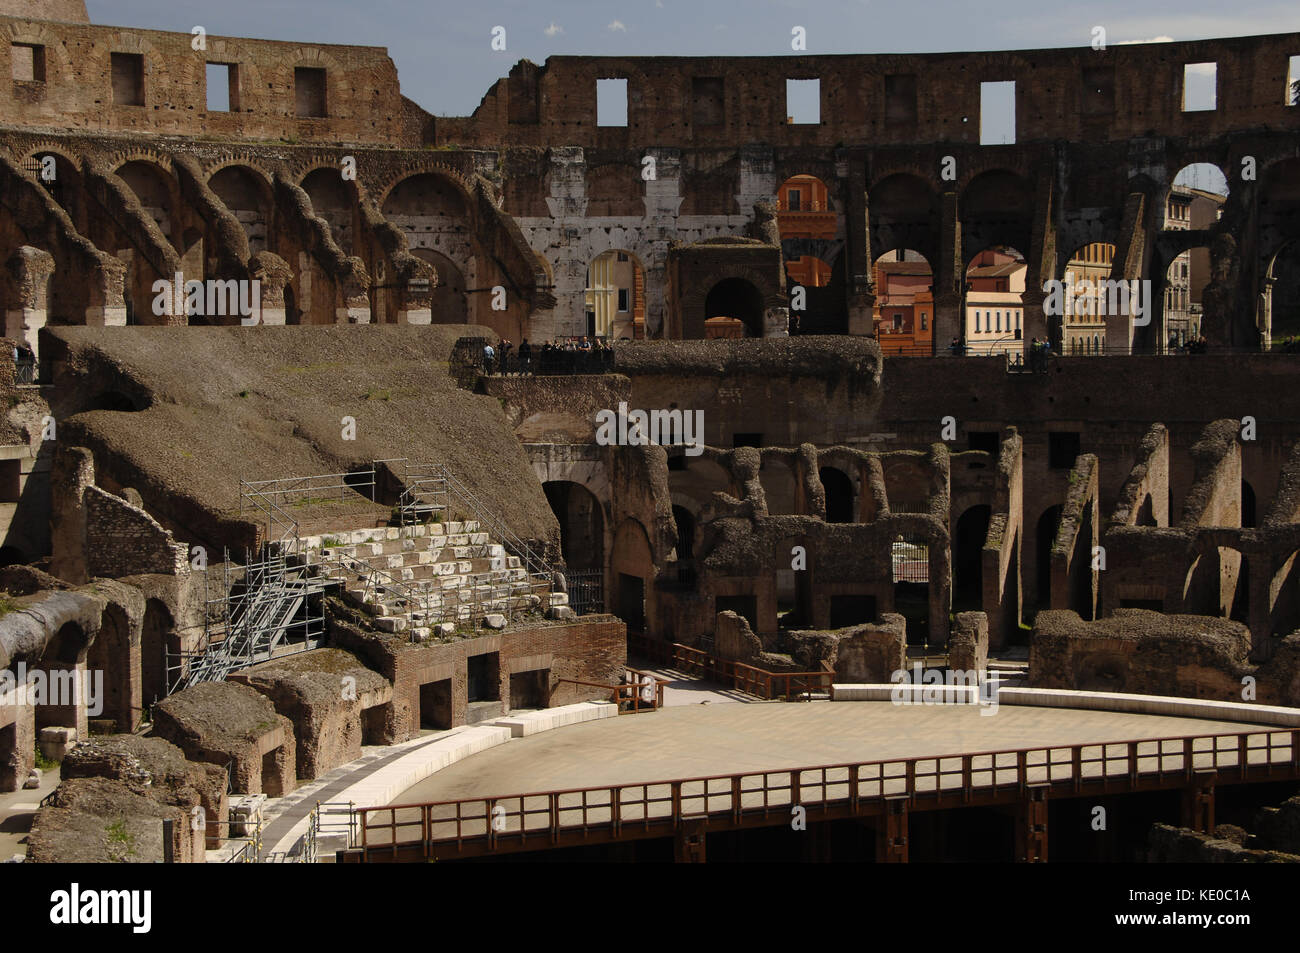 Italy, Rome. Flavian Amphitheatre or Coliseum. Built in 70-80 CE. Flavian dynasty. View of the terraces. Stock Photo